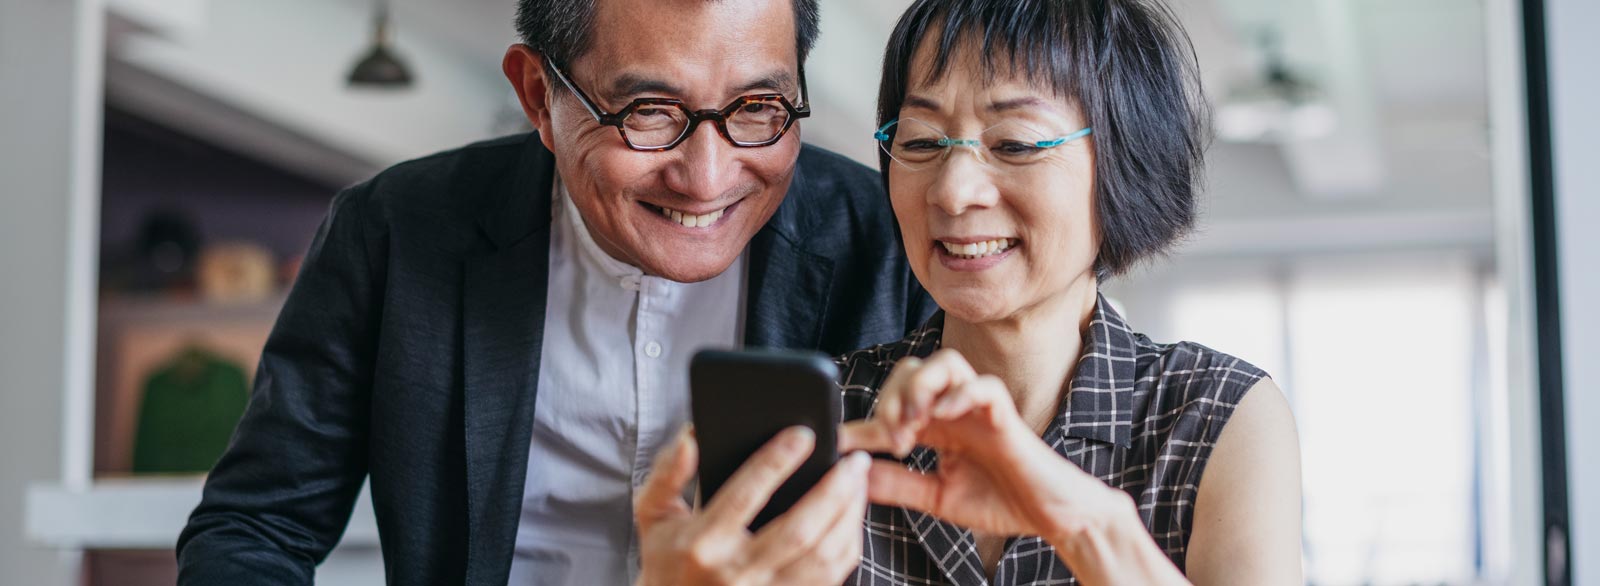 Smiling couple looks at phone